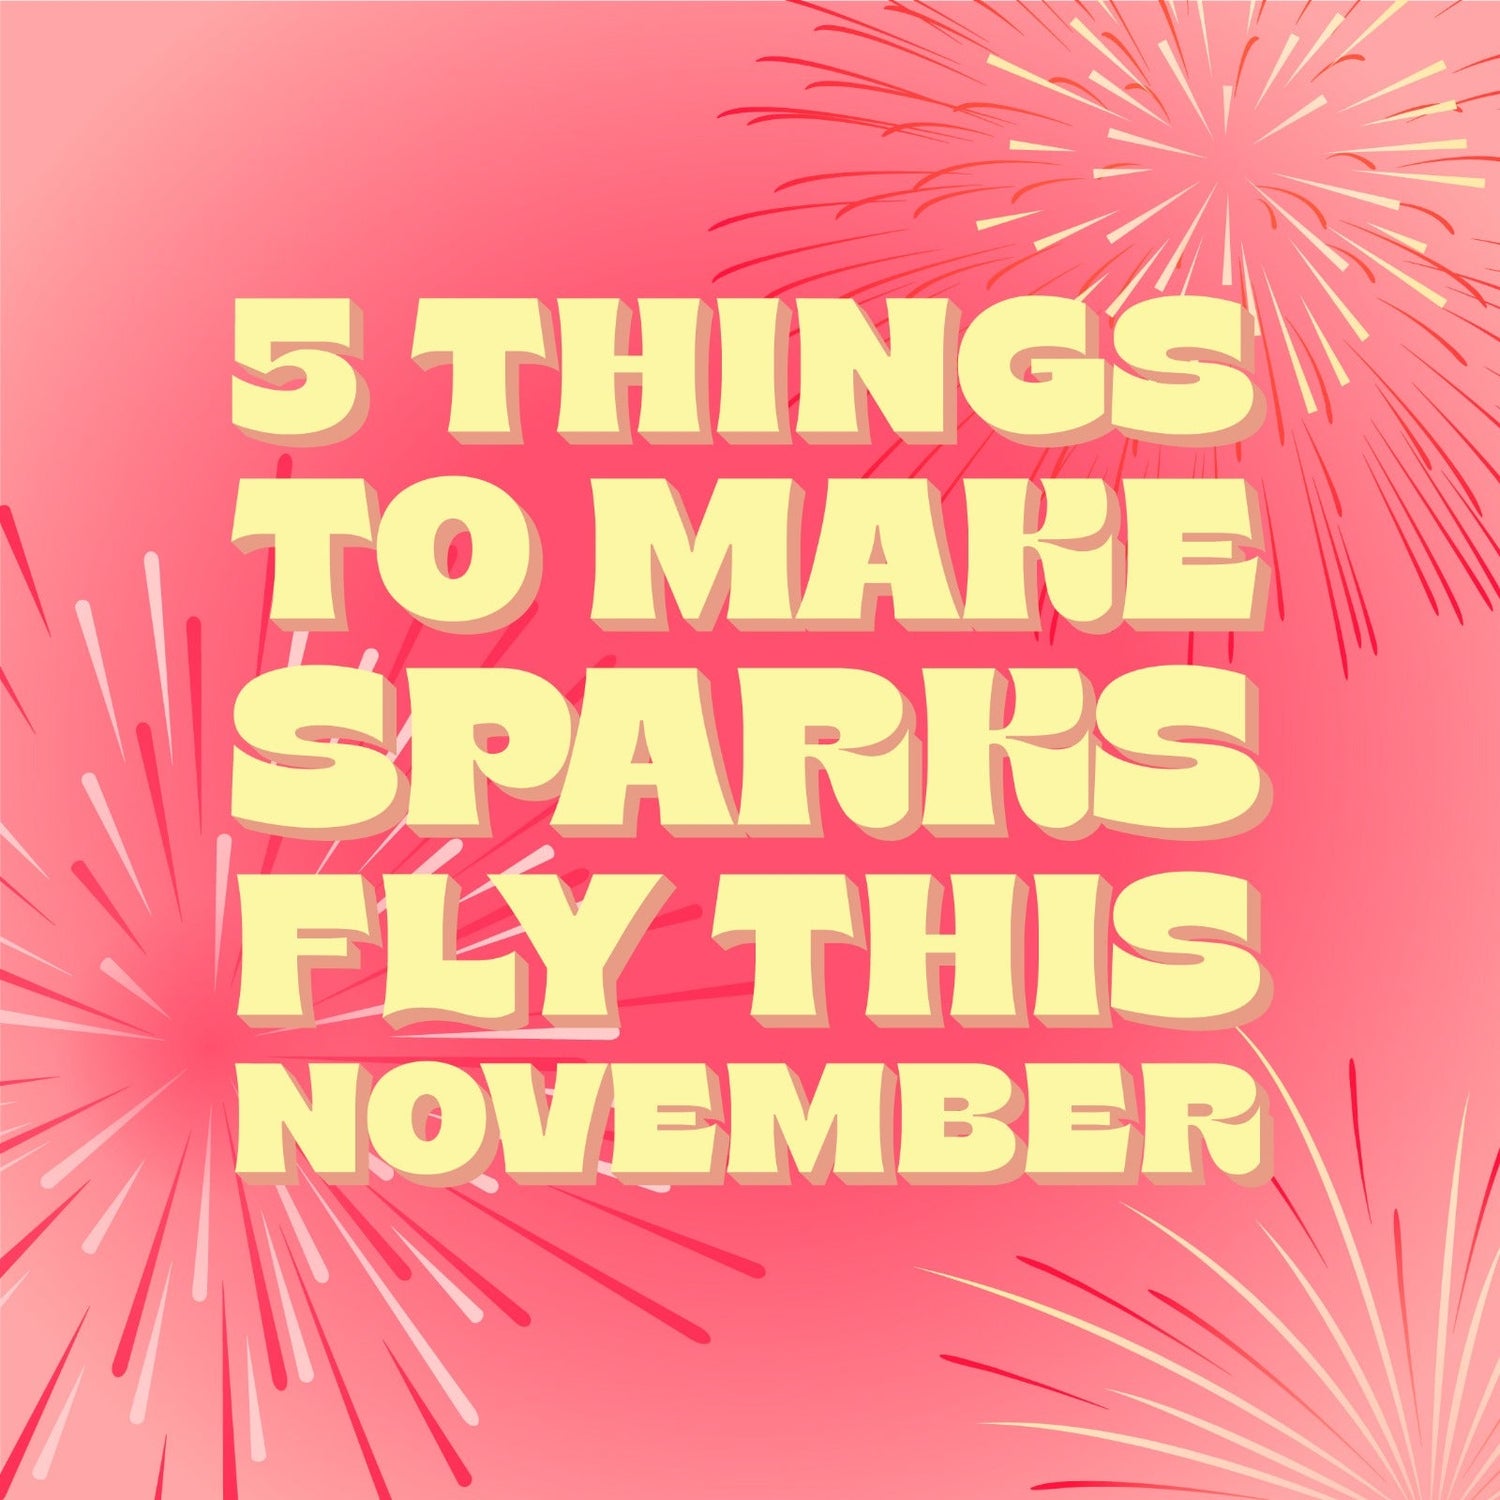 How to make sparks fly this bonfire night ⚡️✨🔥